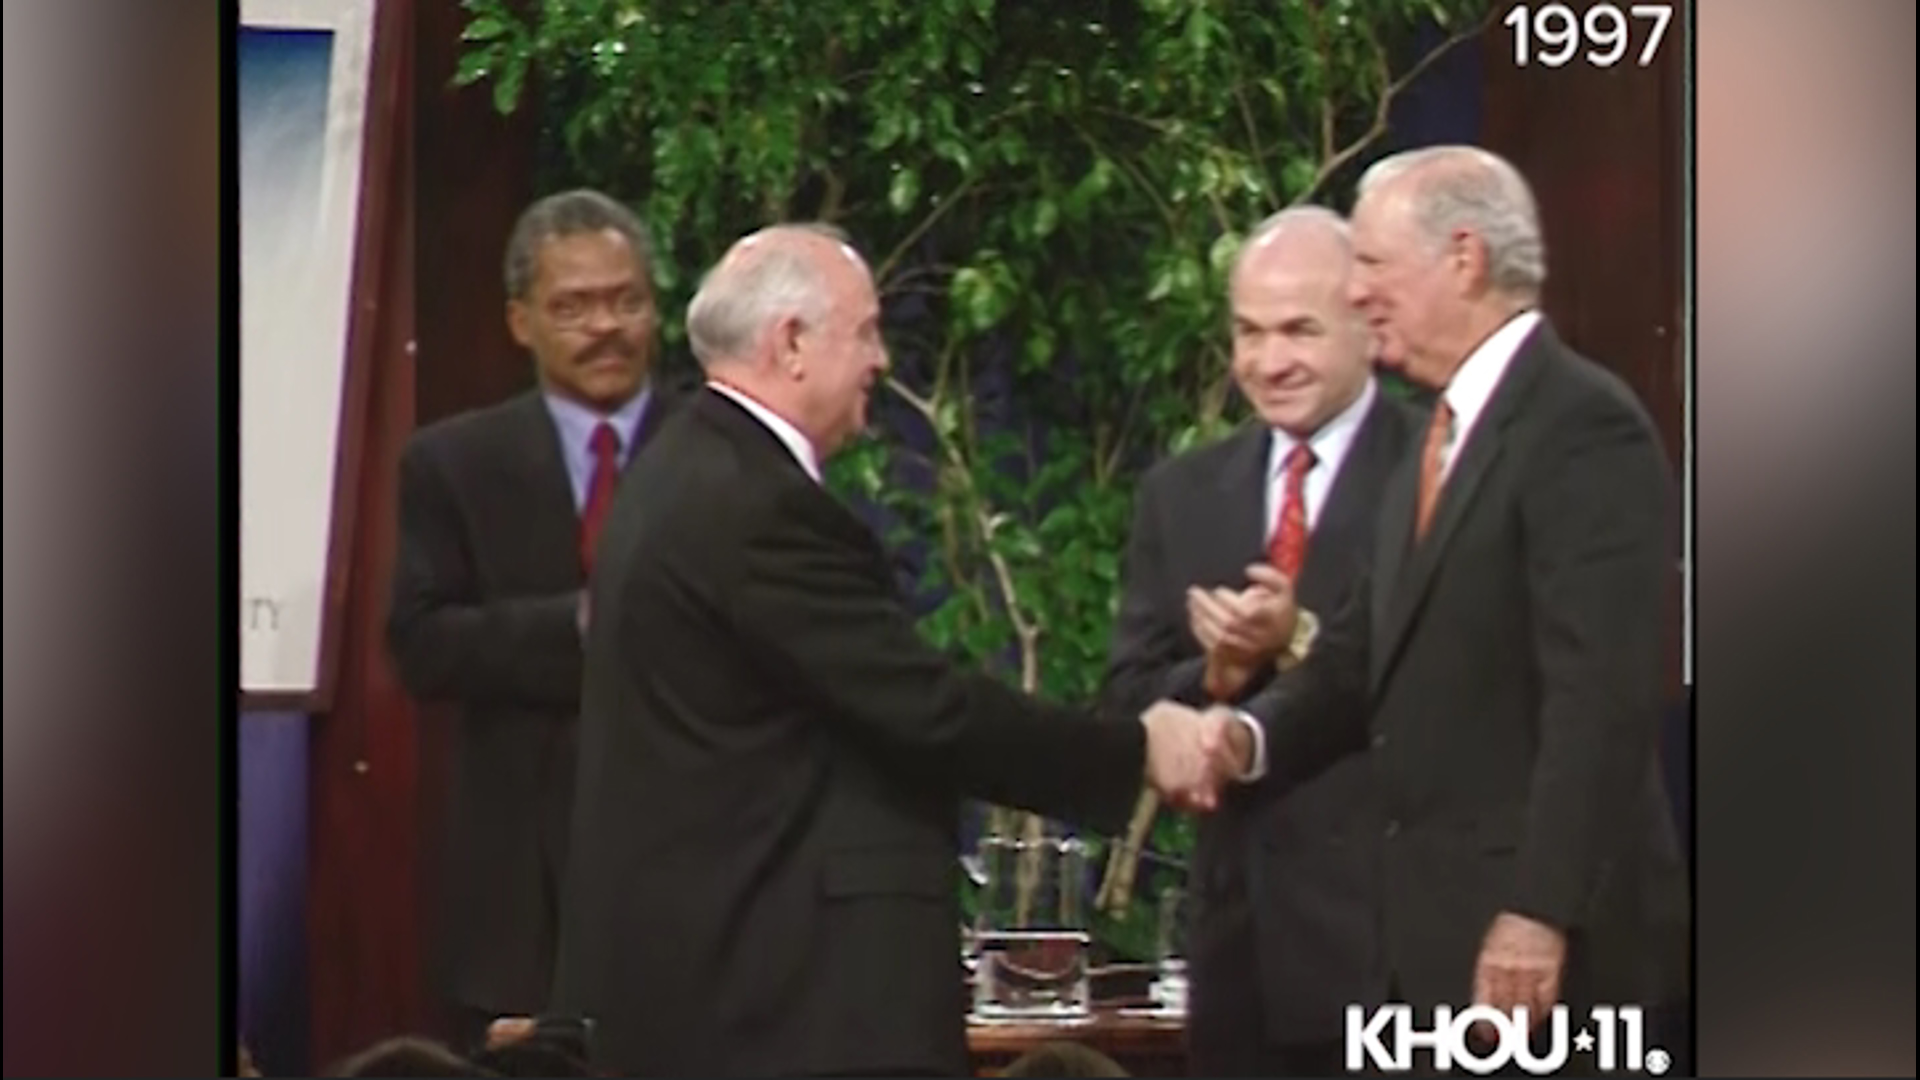 KHOU 11 video from 1997, when Mikhail Gorbachev was in Houston to receive an award for his promotion of world peace.